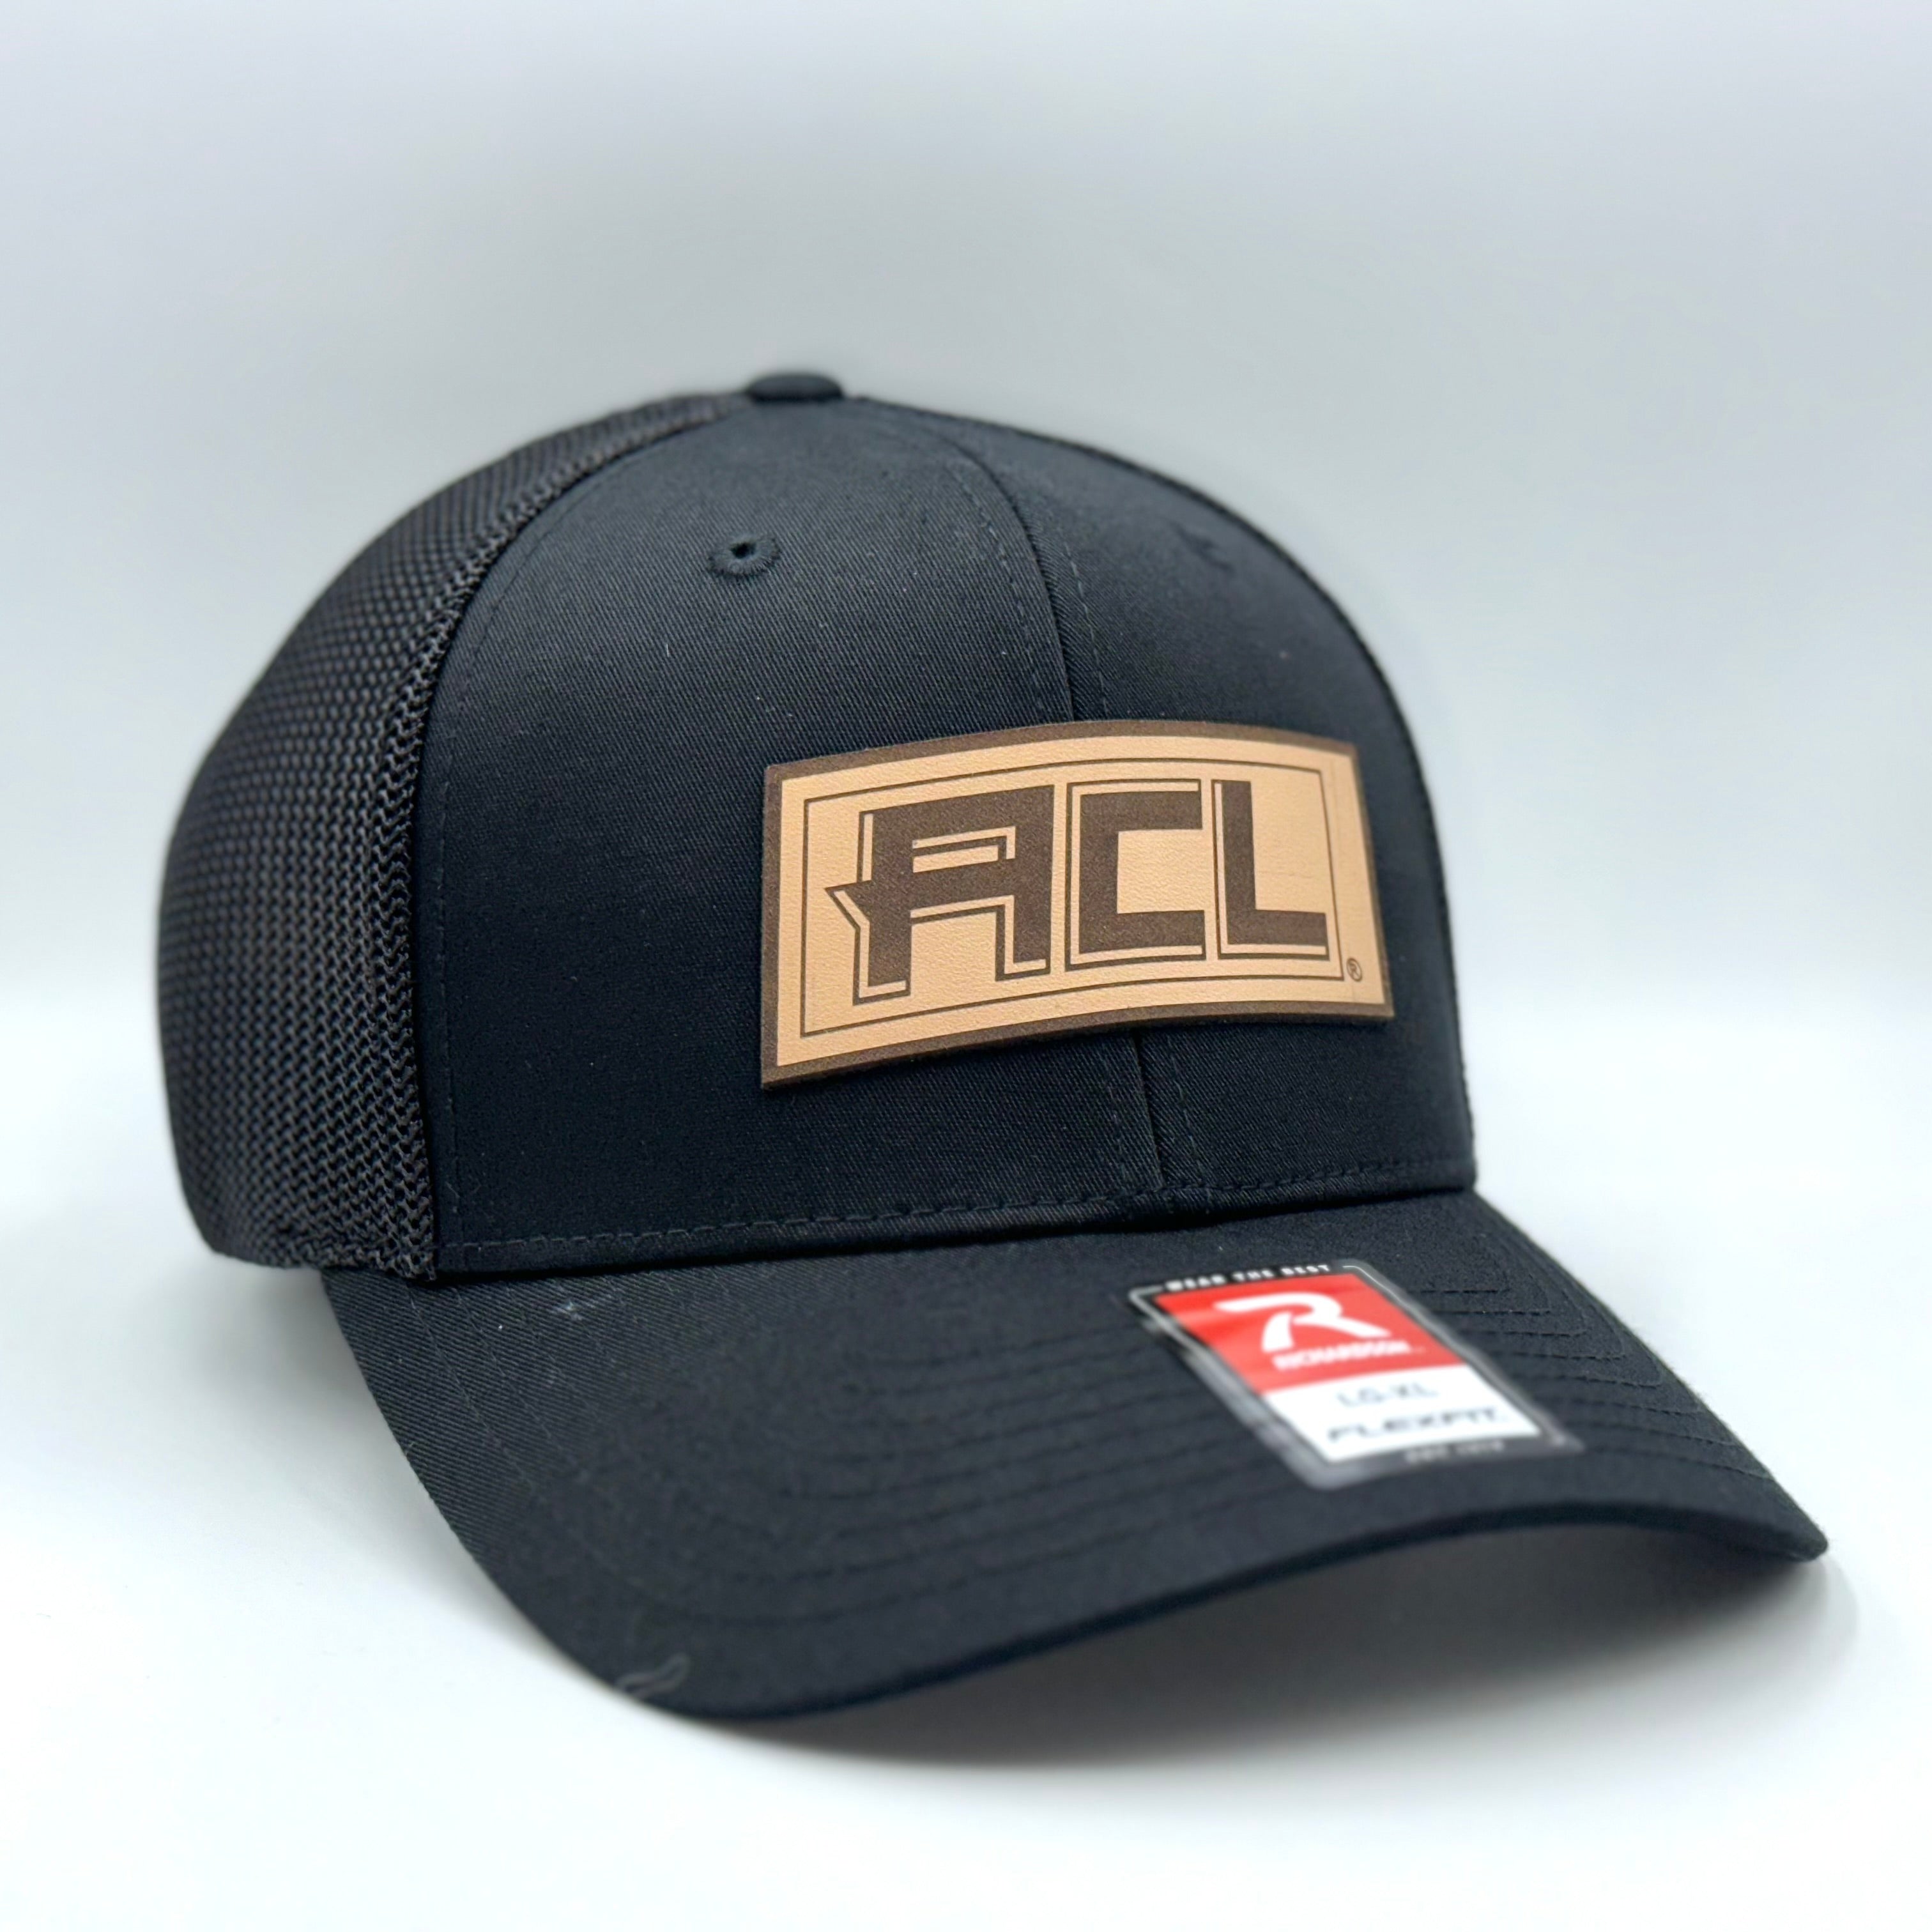 Black Flex Hat With Leather Patch